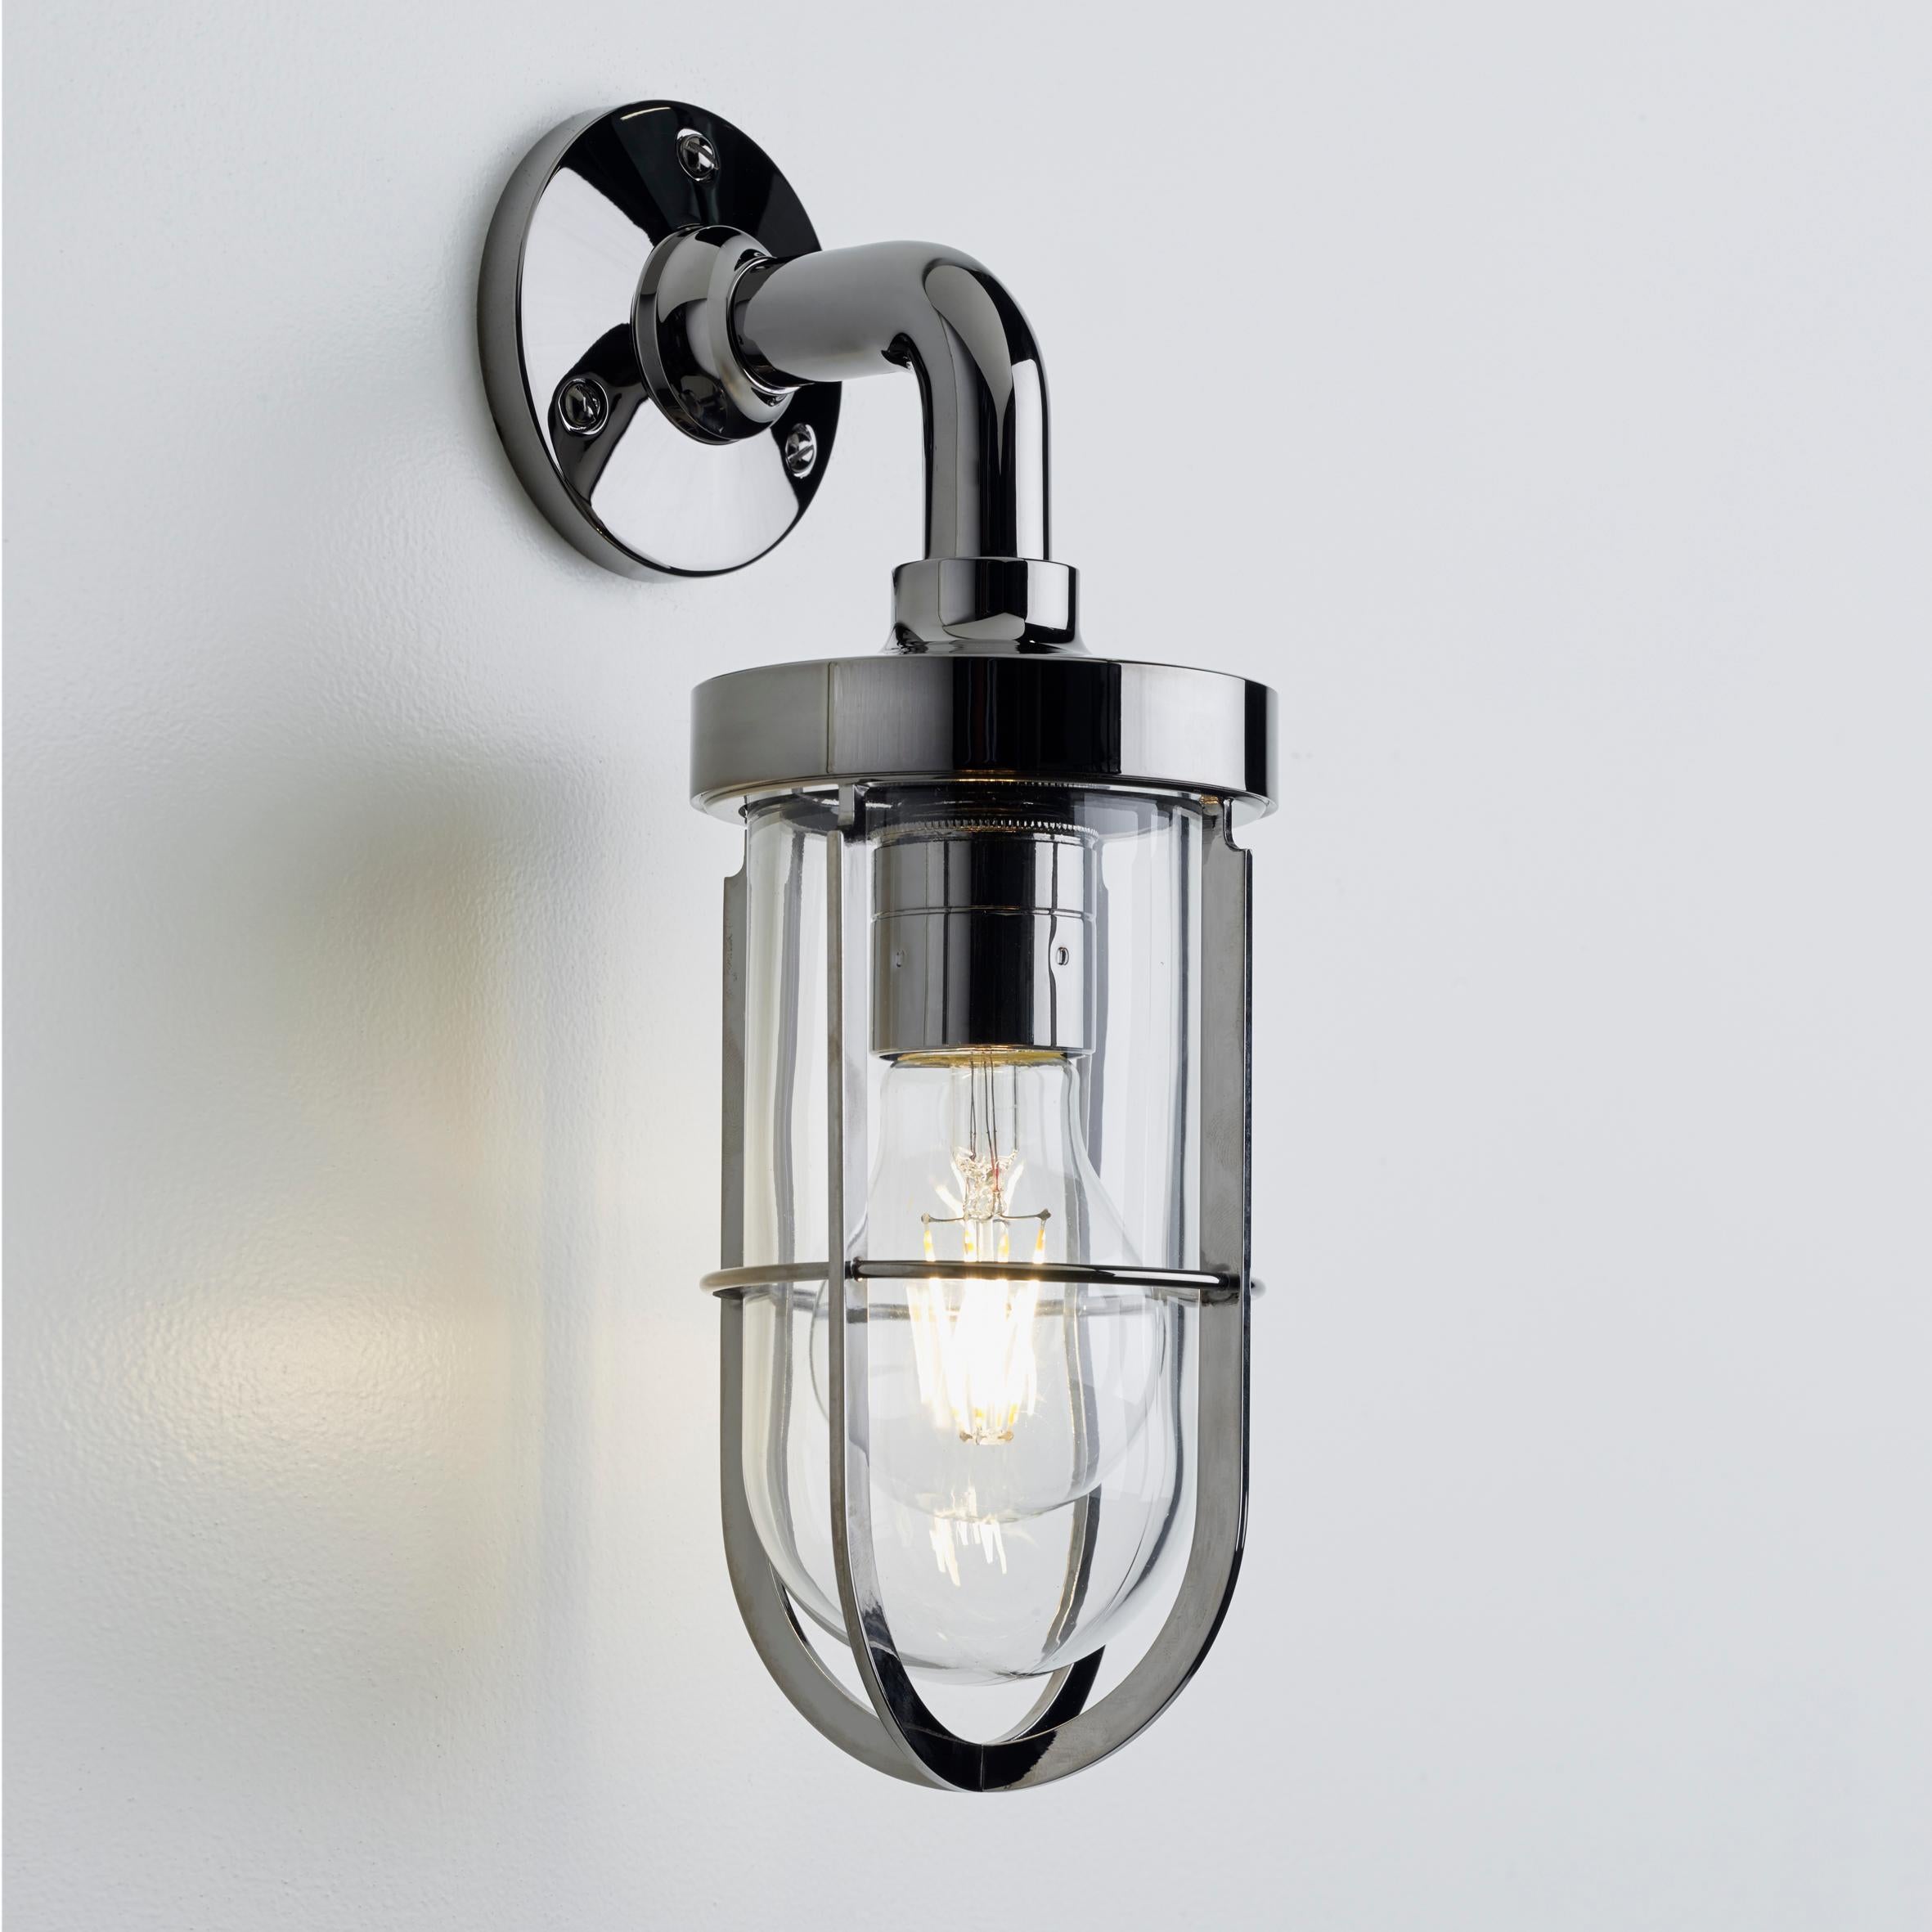 Modern Tekna Docklight Wall Light with Polished Chrome Finish over brass Frosted Glass For Sale